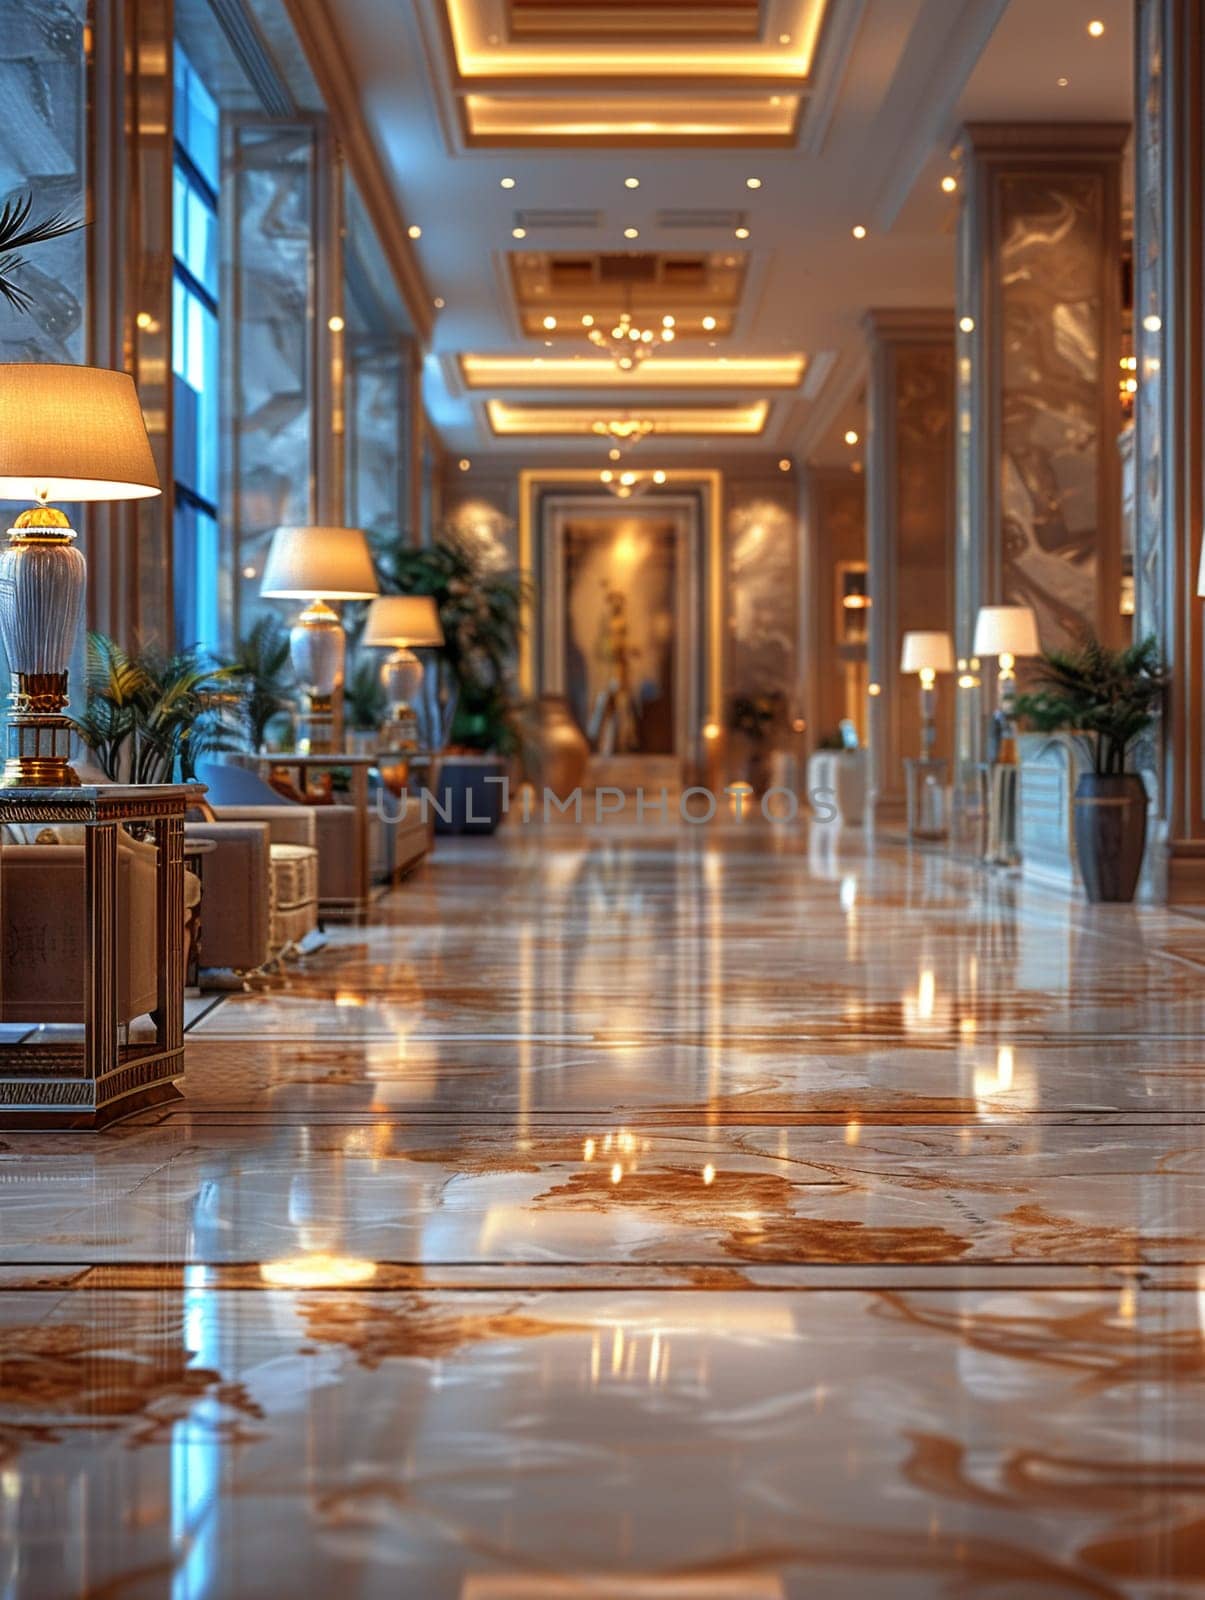 Luxurious Hotel Lobby Hosting Elite Business Conferences, A softly blurred lobby exudes opulence and anticipates important business gatherings.